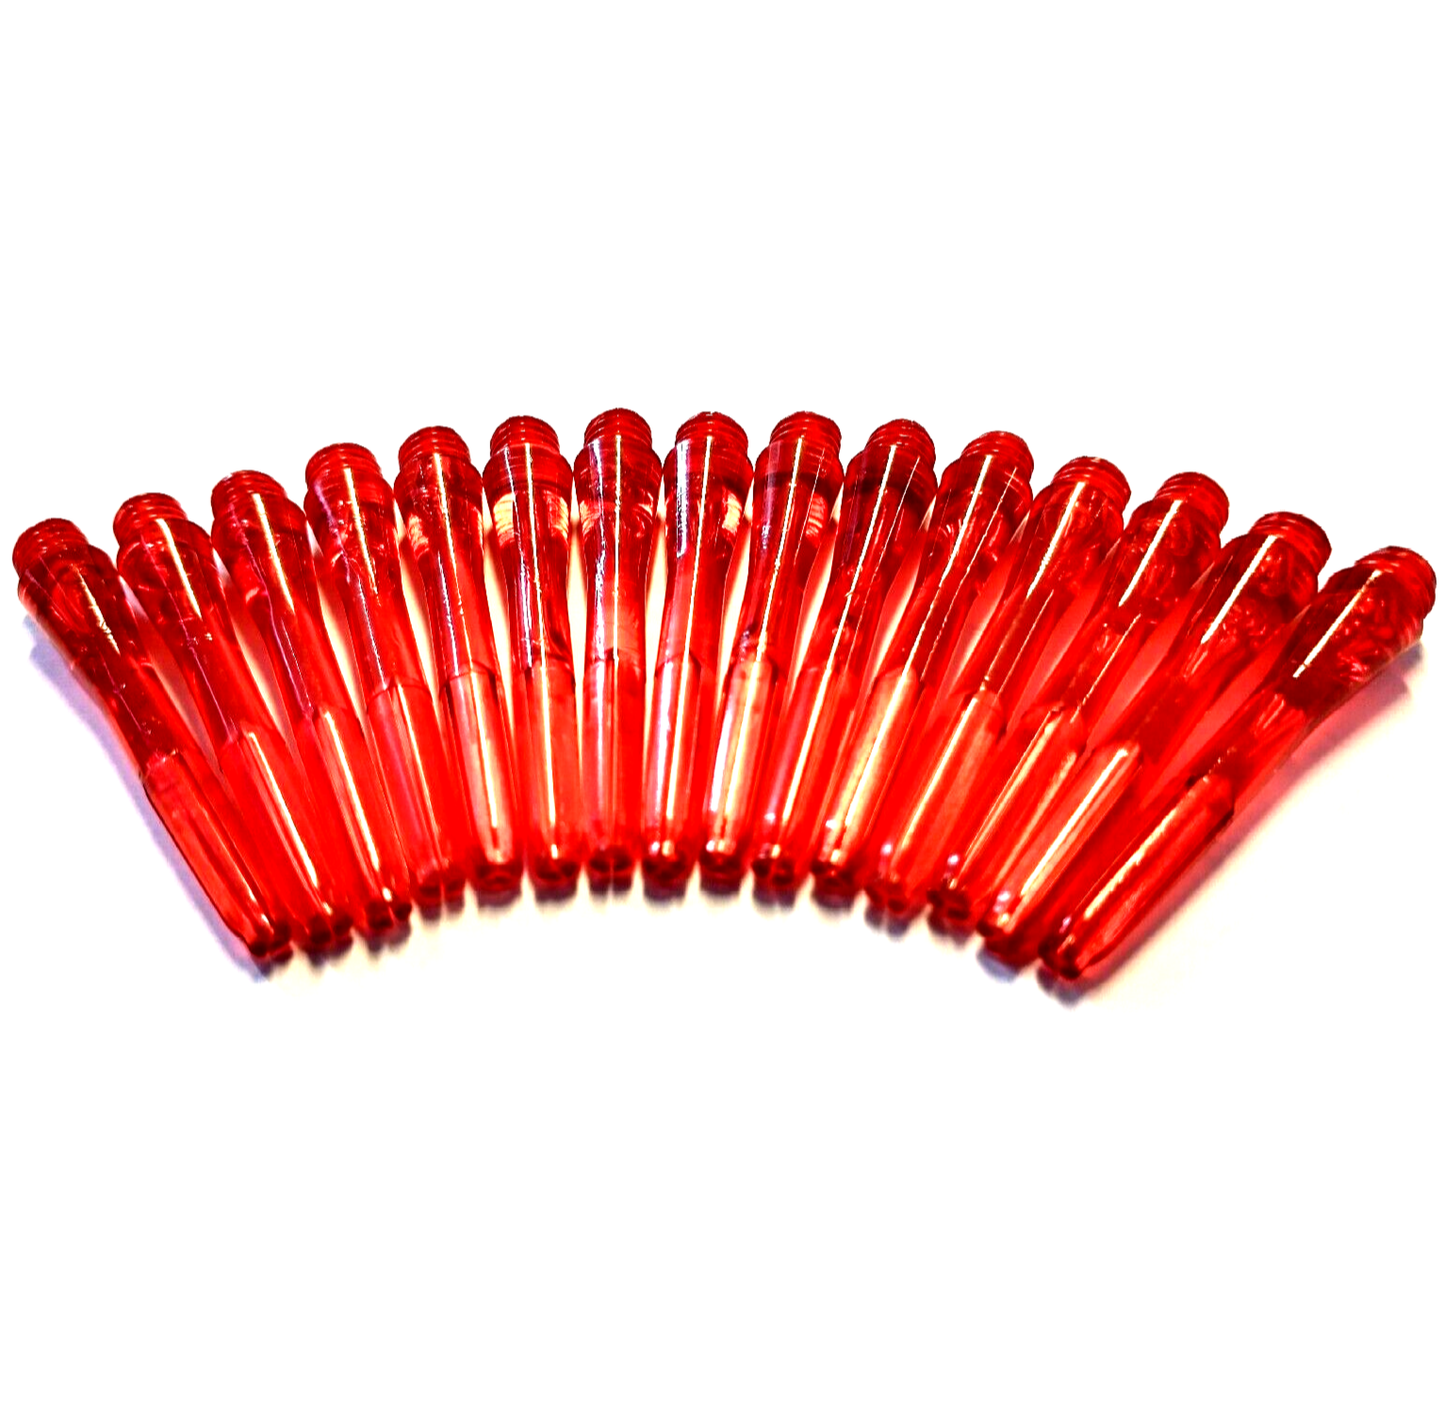 1/4 Inch Thread Darts Stems - Red Polycarbonate